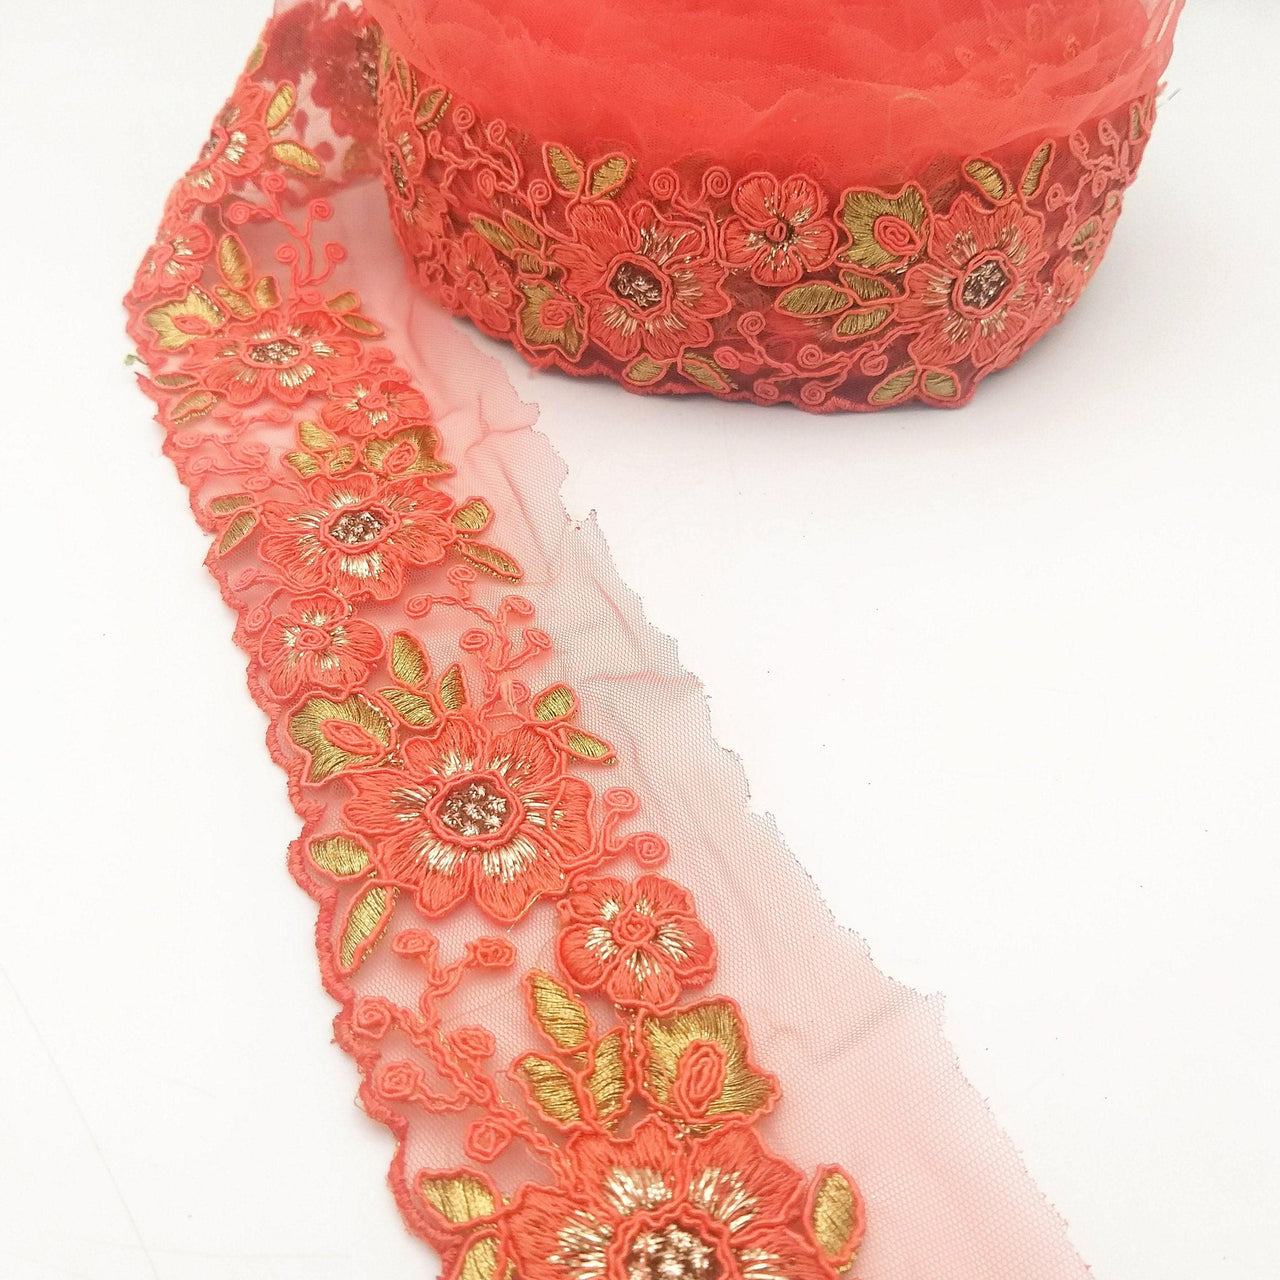 Flamingo Orange Net Fabric Lace Trim with Floral Embroidery in Orange and Gold, Lace Trim, Sari Border